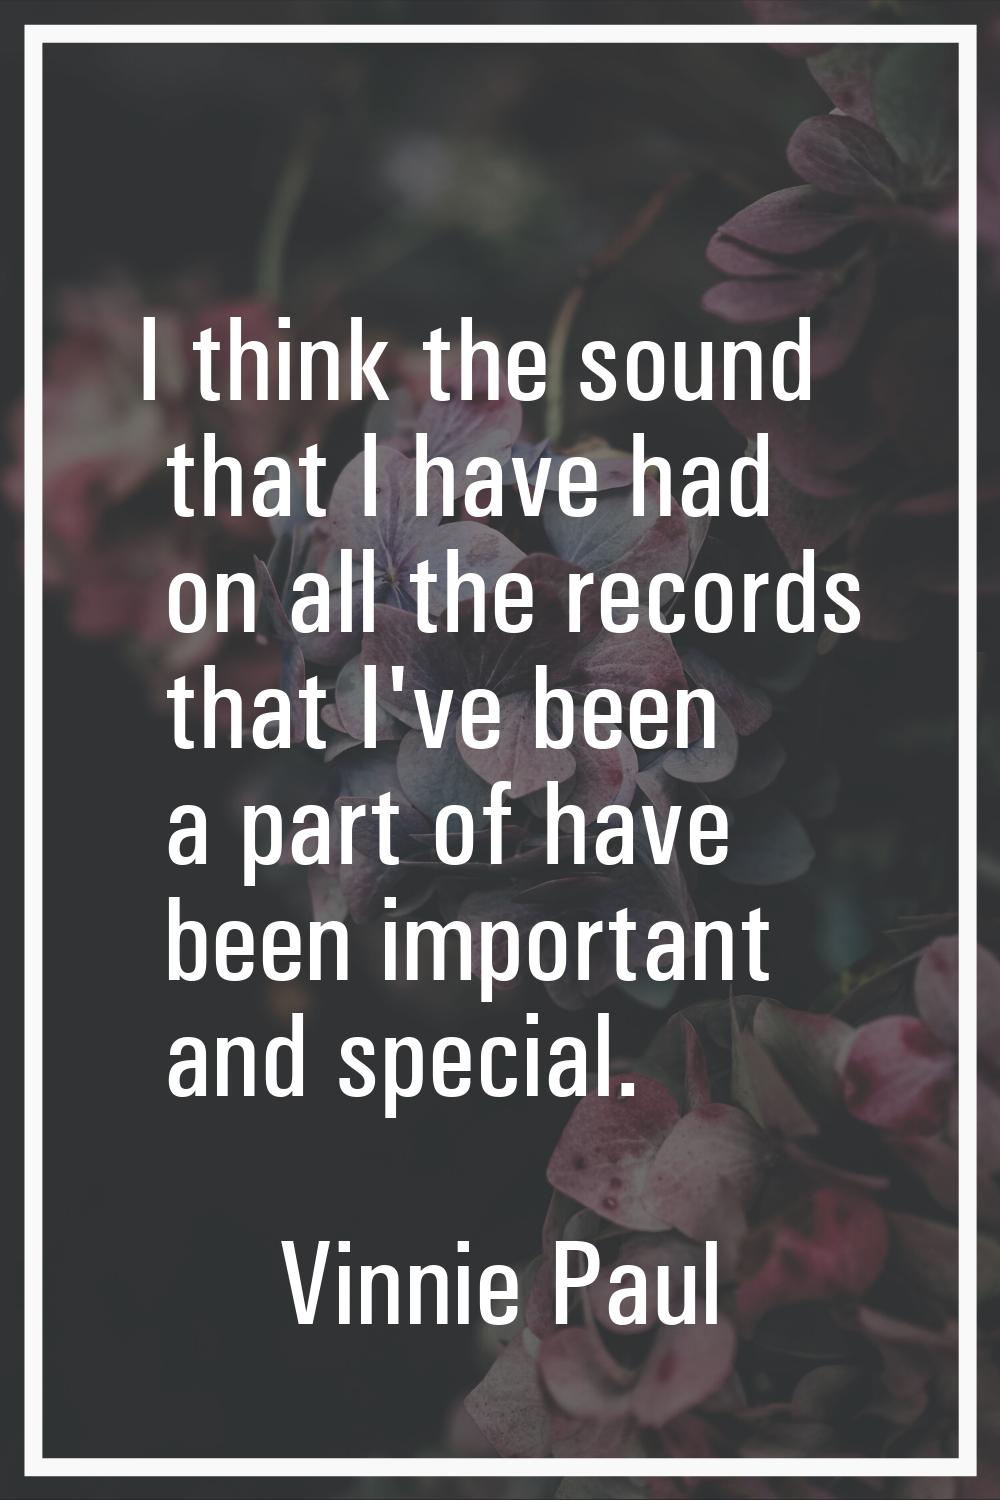 I think the sound that I have had on all the records that I've been a part of have been important a